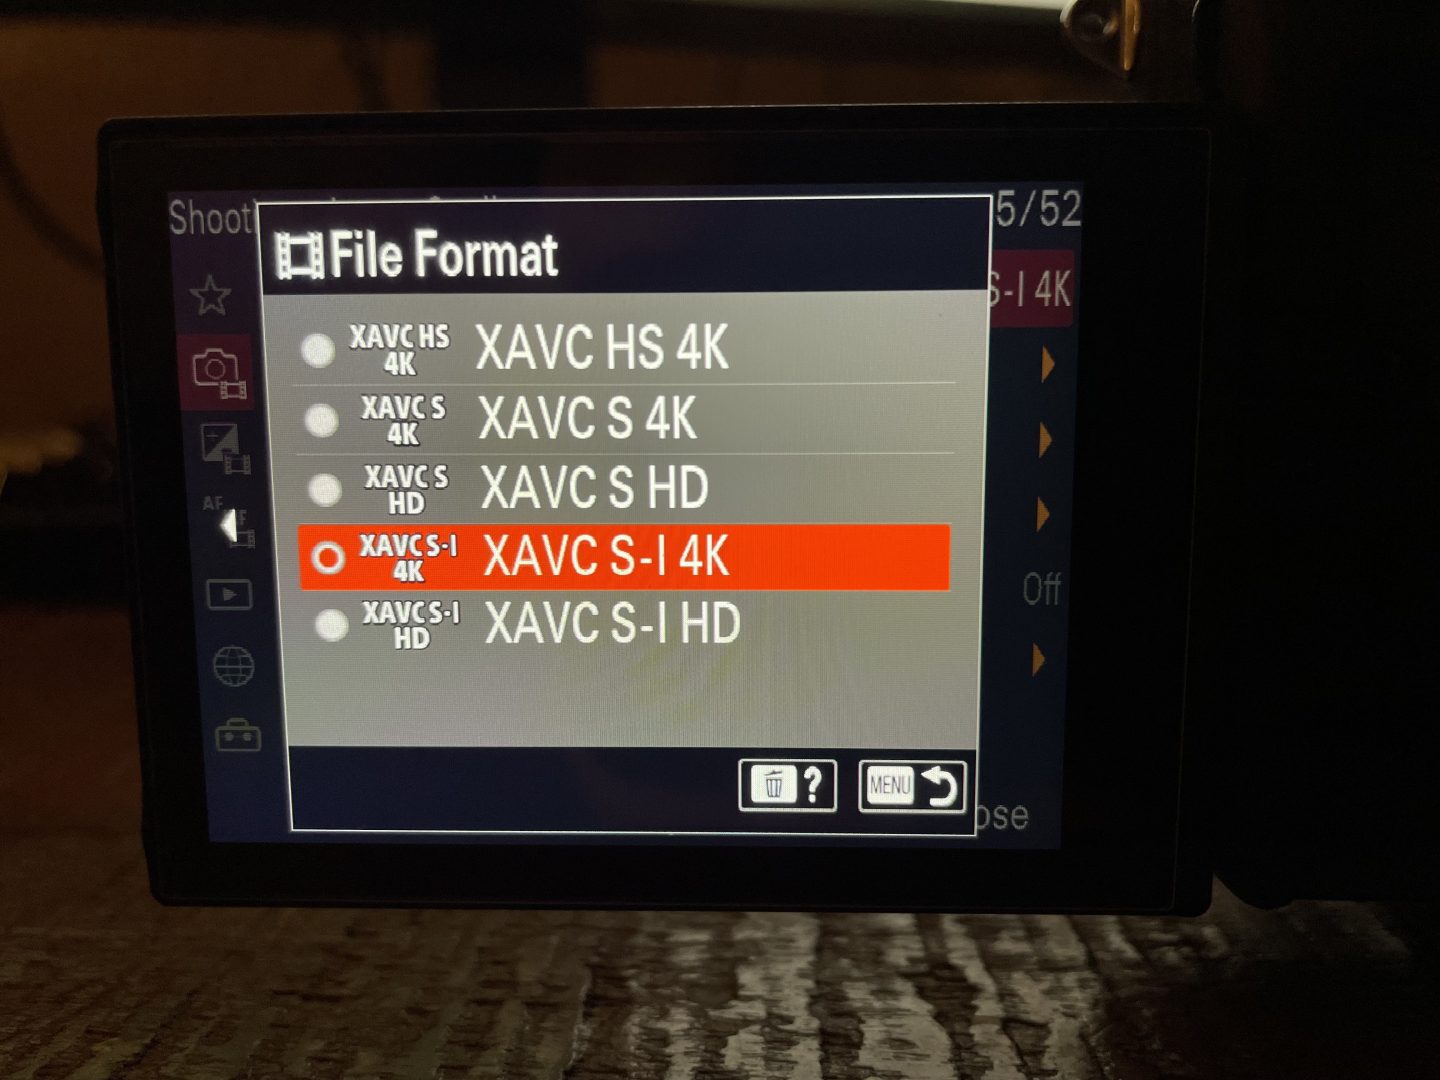 Open your a7S III's menu and for file format, select XAVC S-I